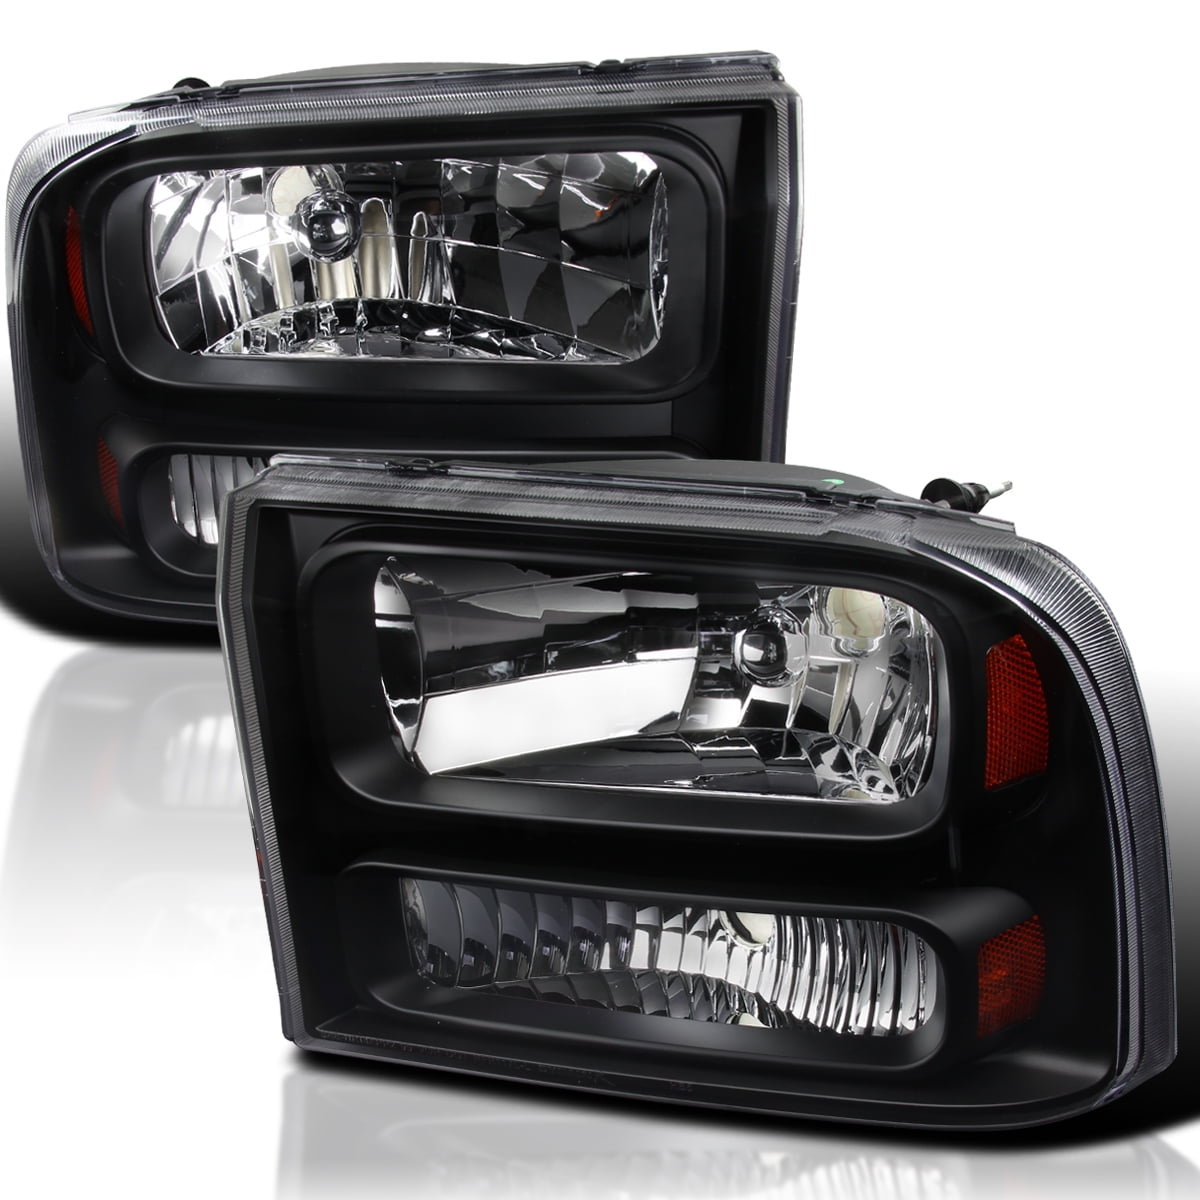 Spec-D Tuning Black Clear Headlights Compatible with Ford F250